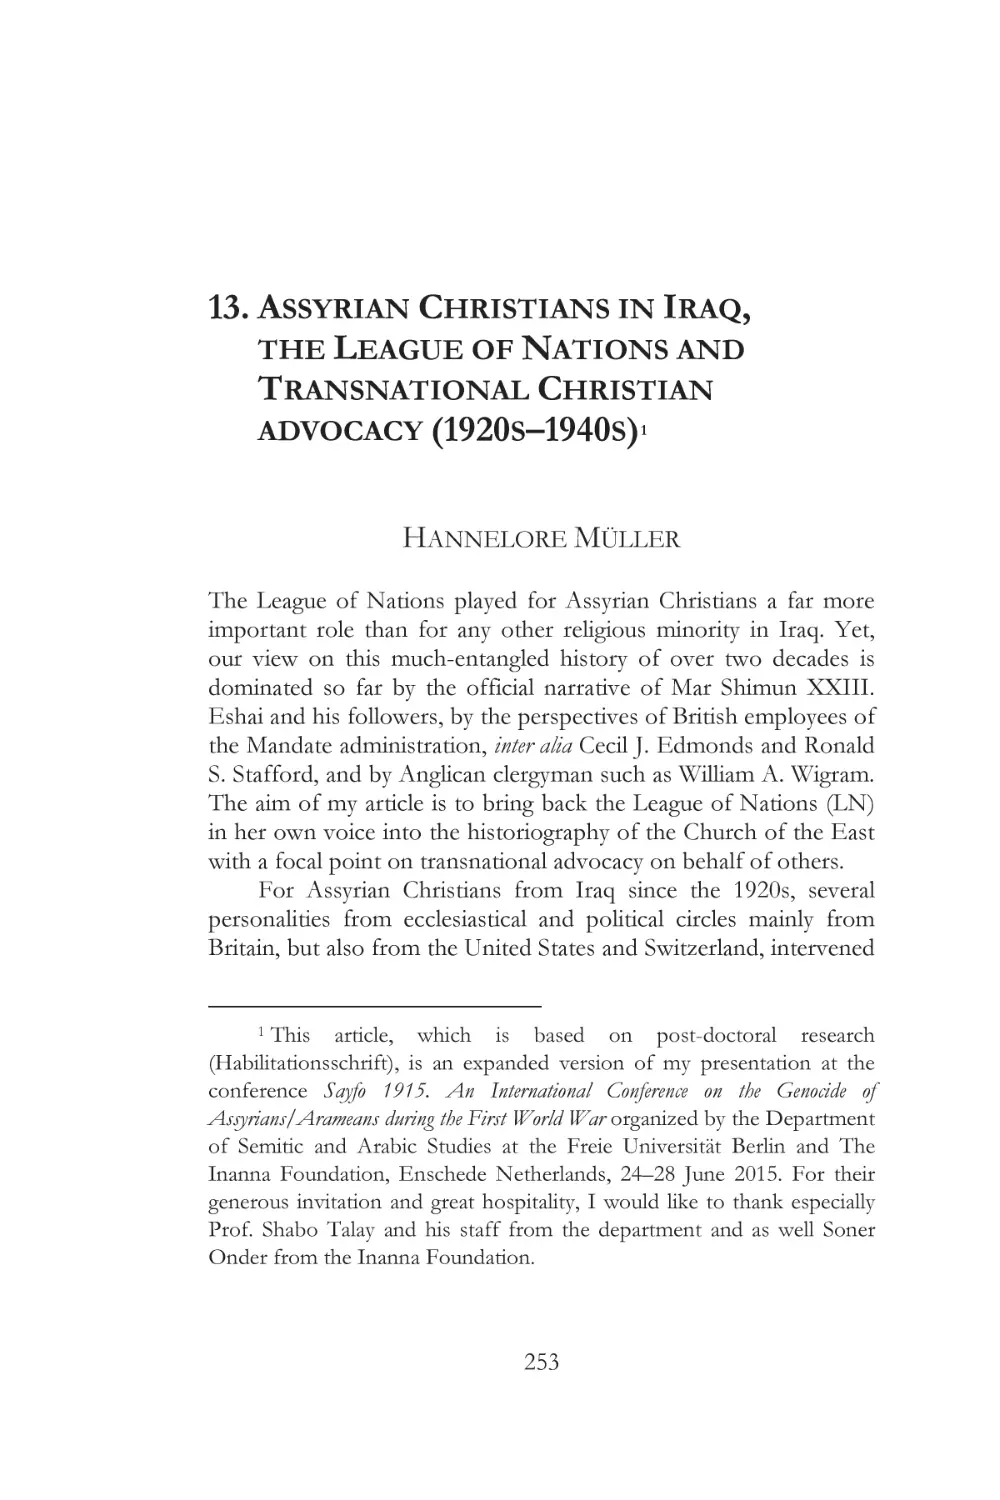 13. ASSYRIAN CHRISTIANS IN IRAQ, THE LEAGUE OF NATIONS AND TRANSNATIONAL CHRISTIAN ADVOCACY (1920s–1940s)